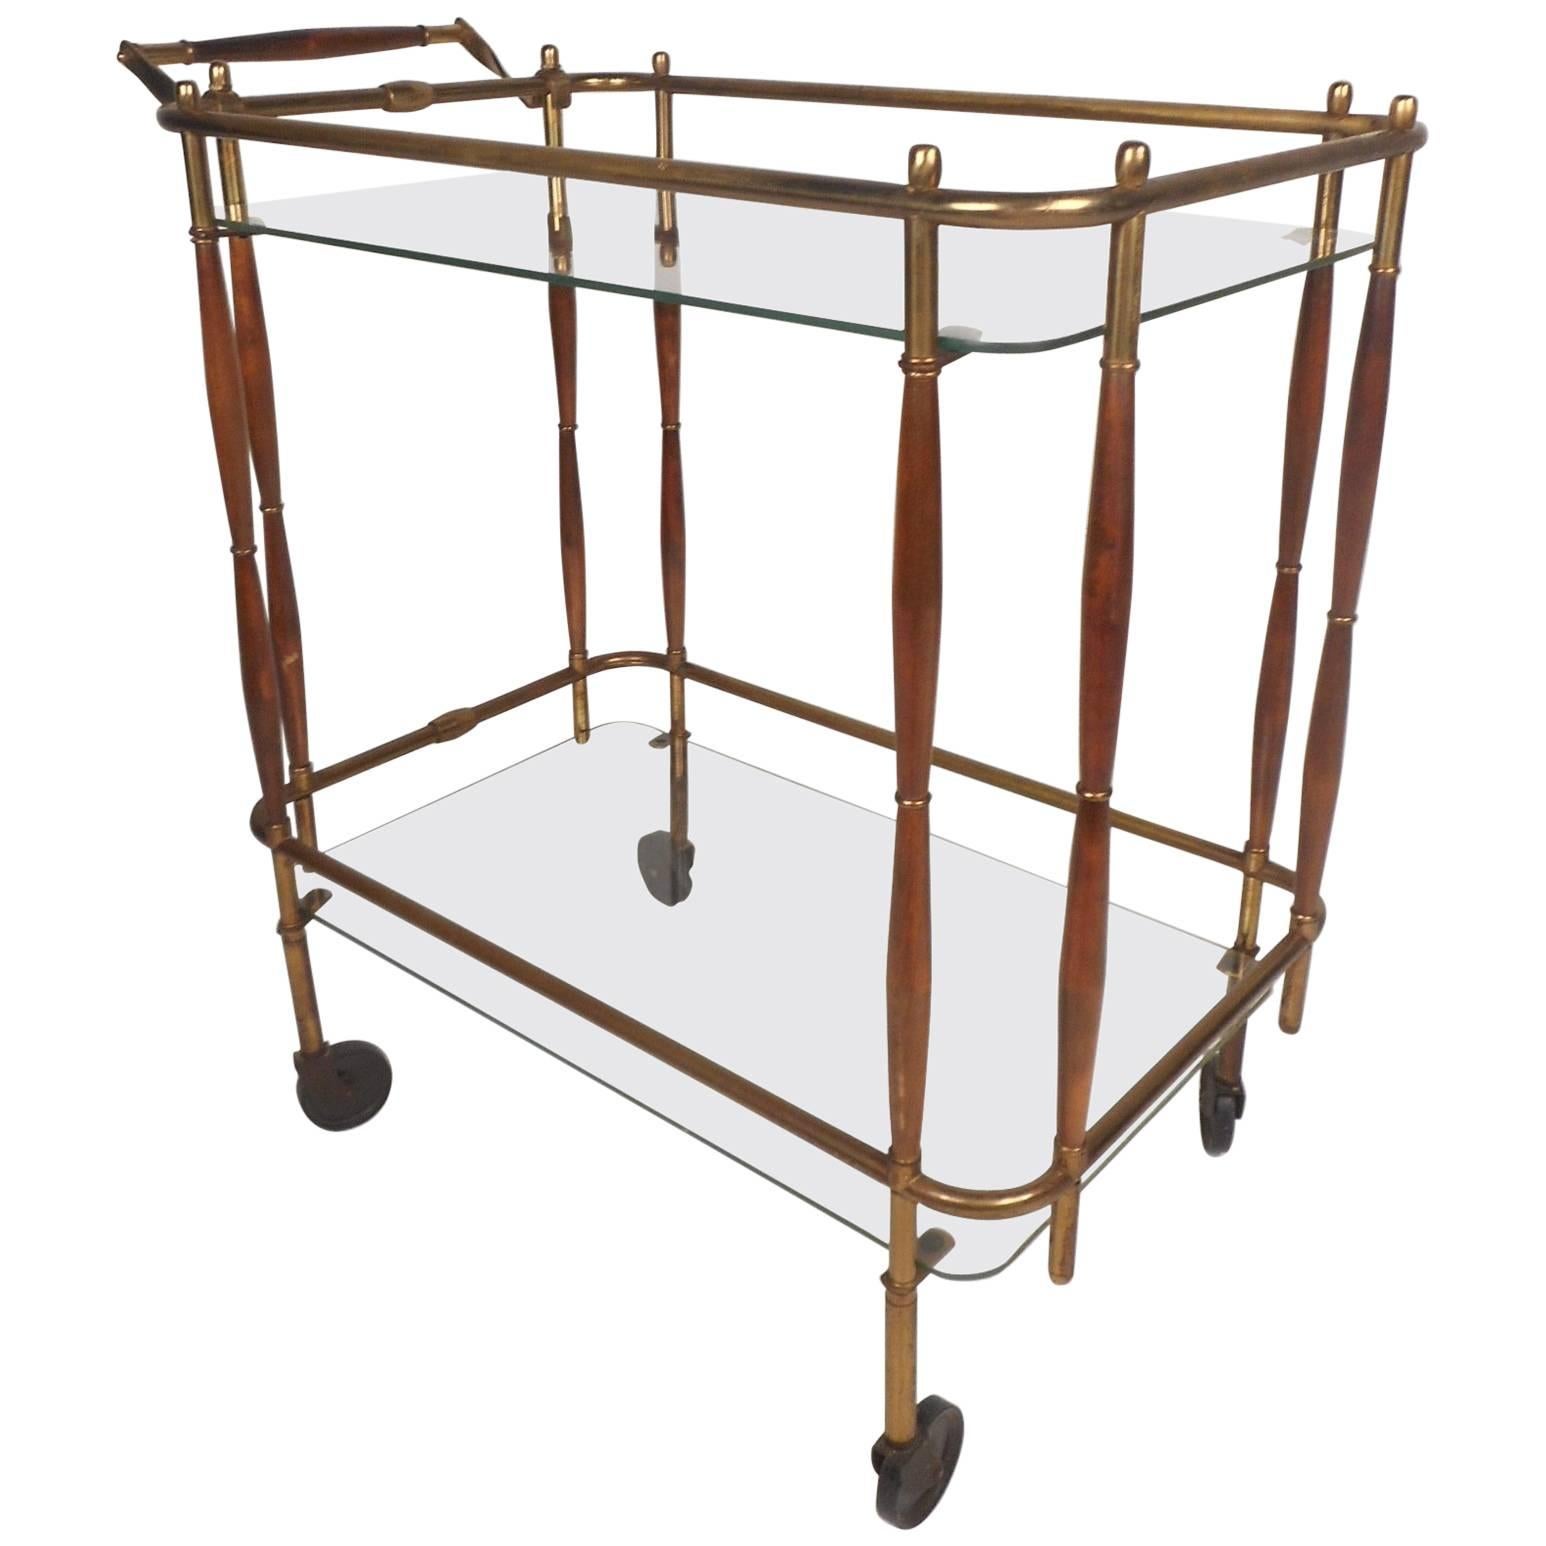 Unique Mid-Century Modern Brass and Wood Rolling Bar Cart